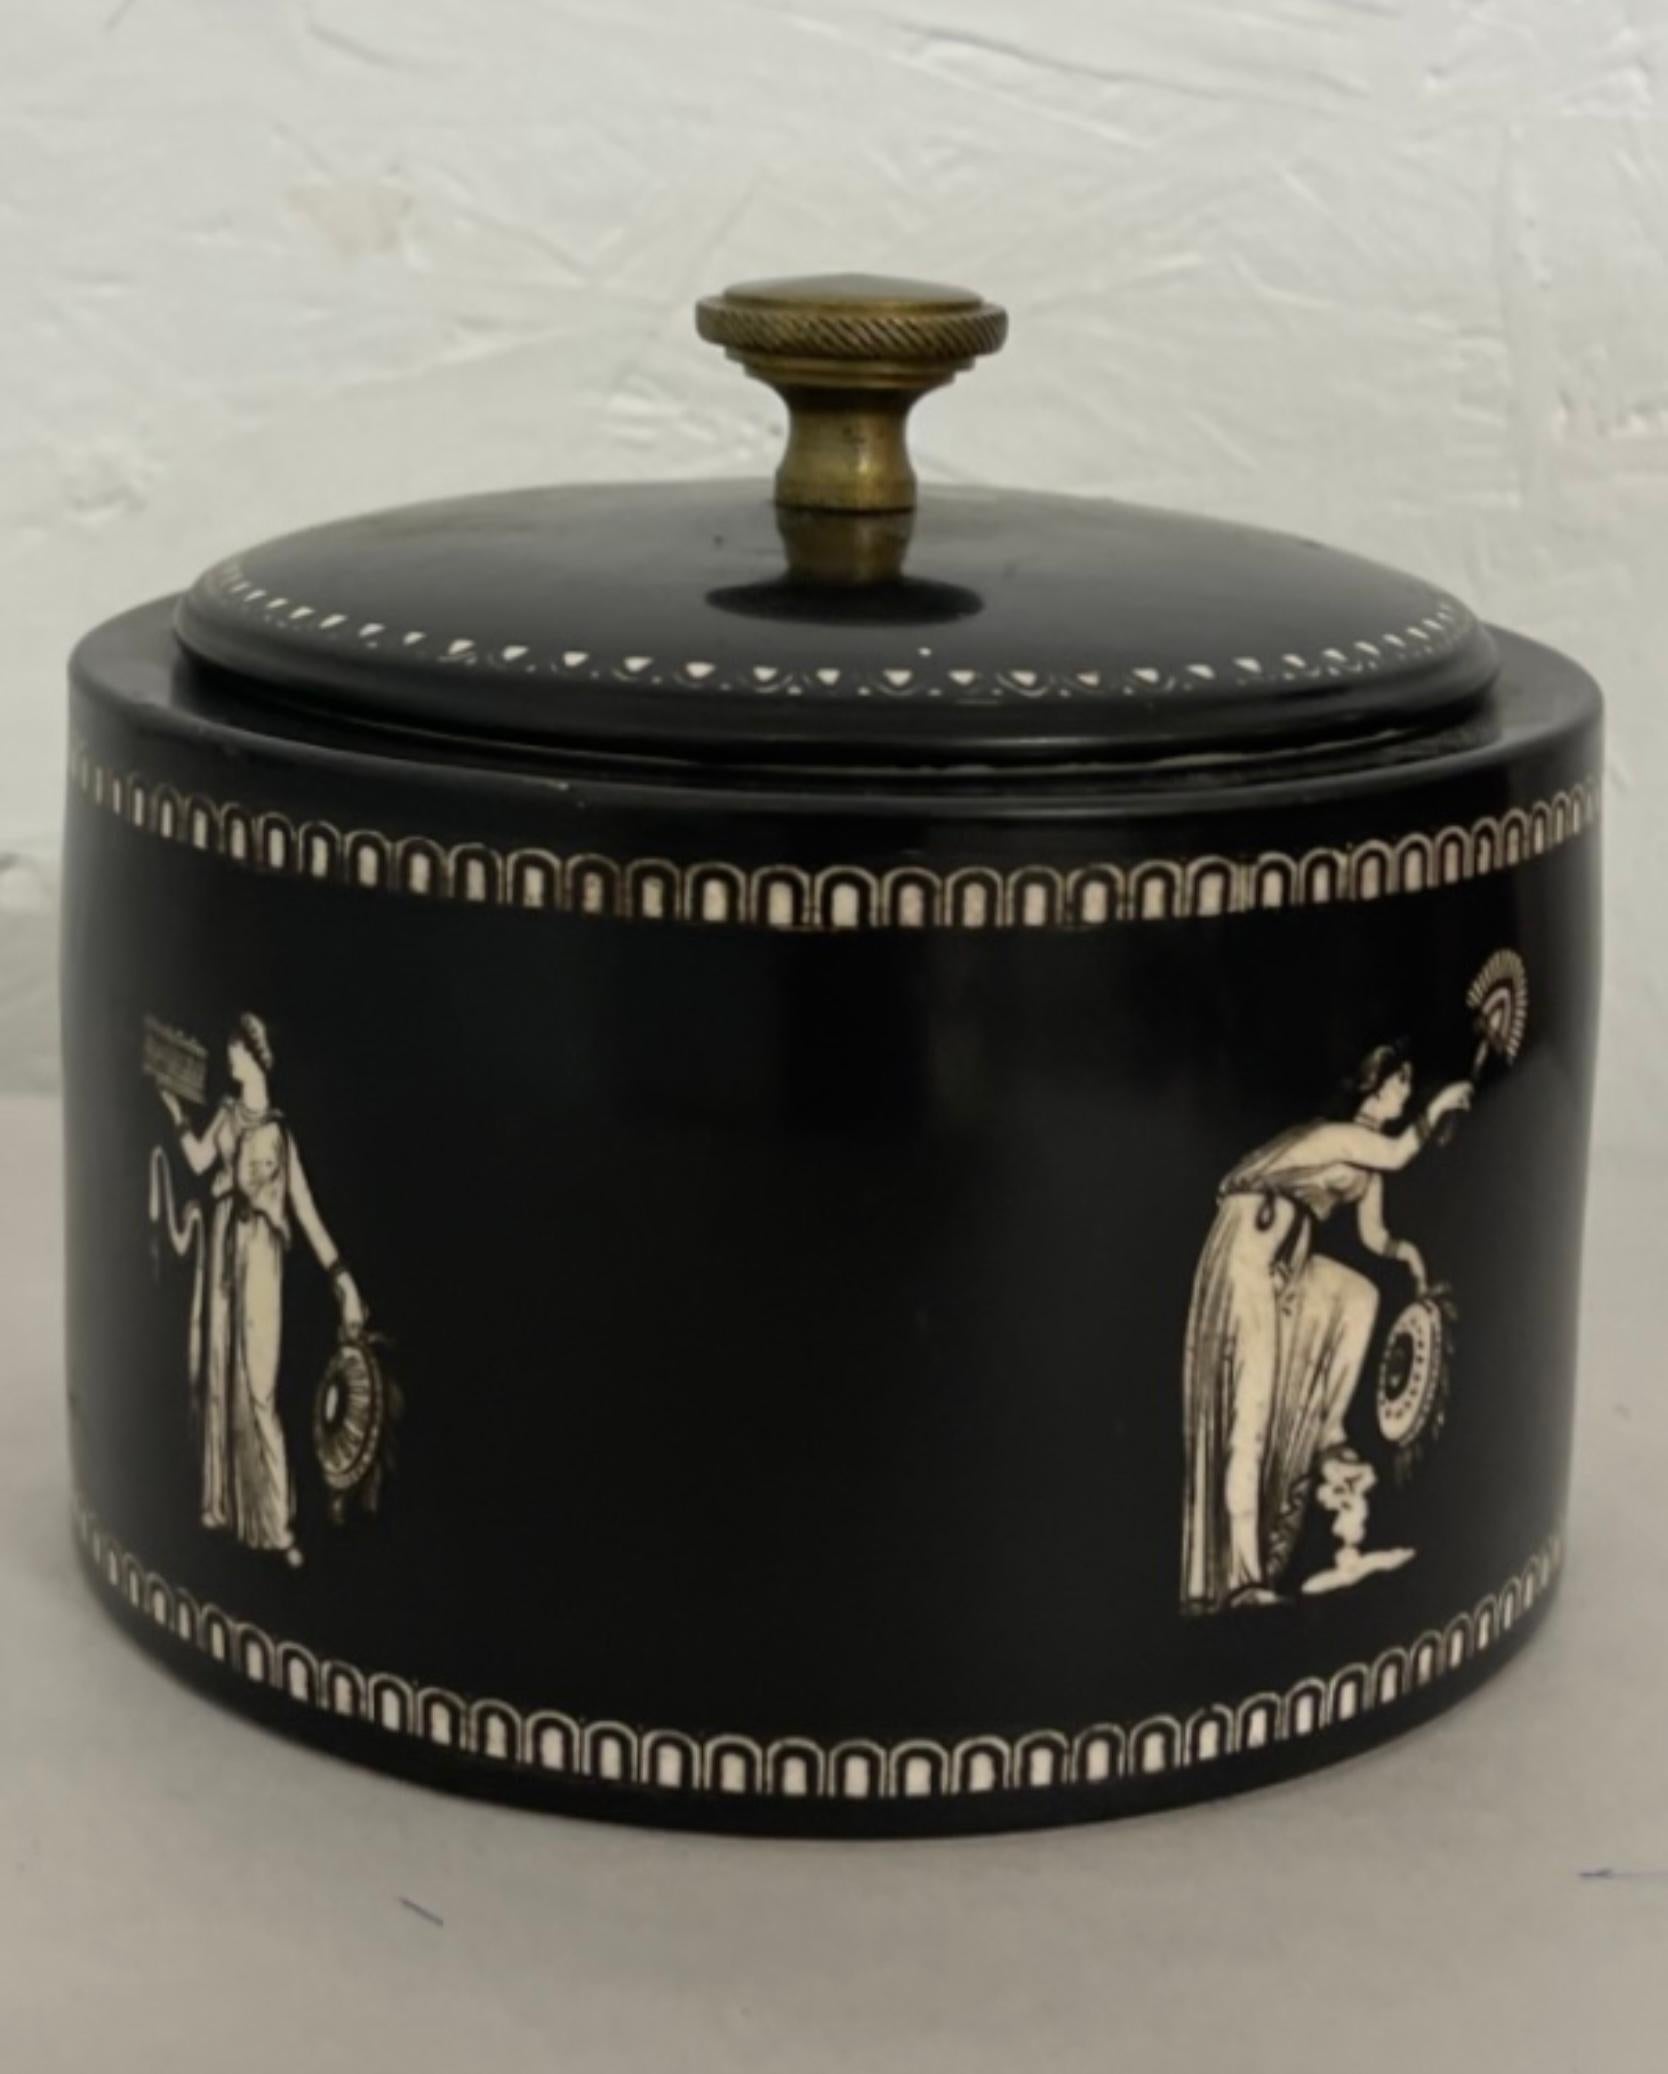 19th Century 19th-C. English Neo-Classical Style Staffordhire Pottery Biscuit Jar For Sale